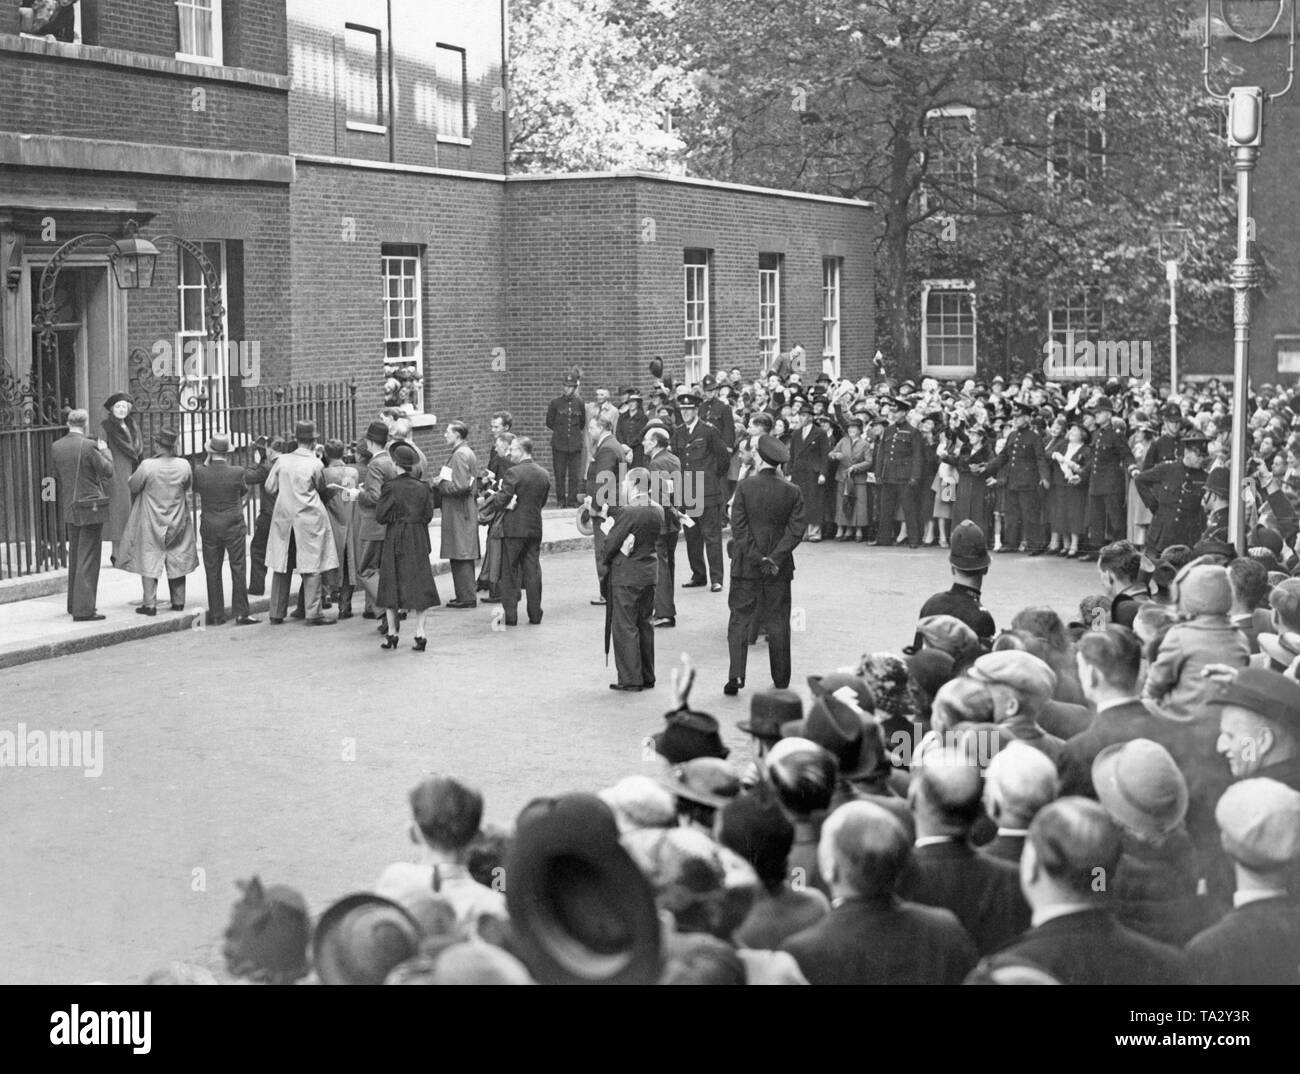 The wife of British Prime Minister, Anne Chamberlain, in front of the residence of the Prime Minister at 10 Downing Street. She leaves the house for a walk and is greeted by a crowd. Stock Photo